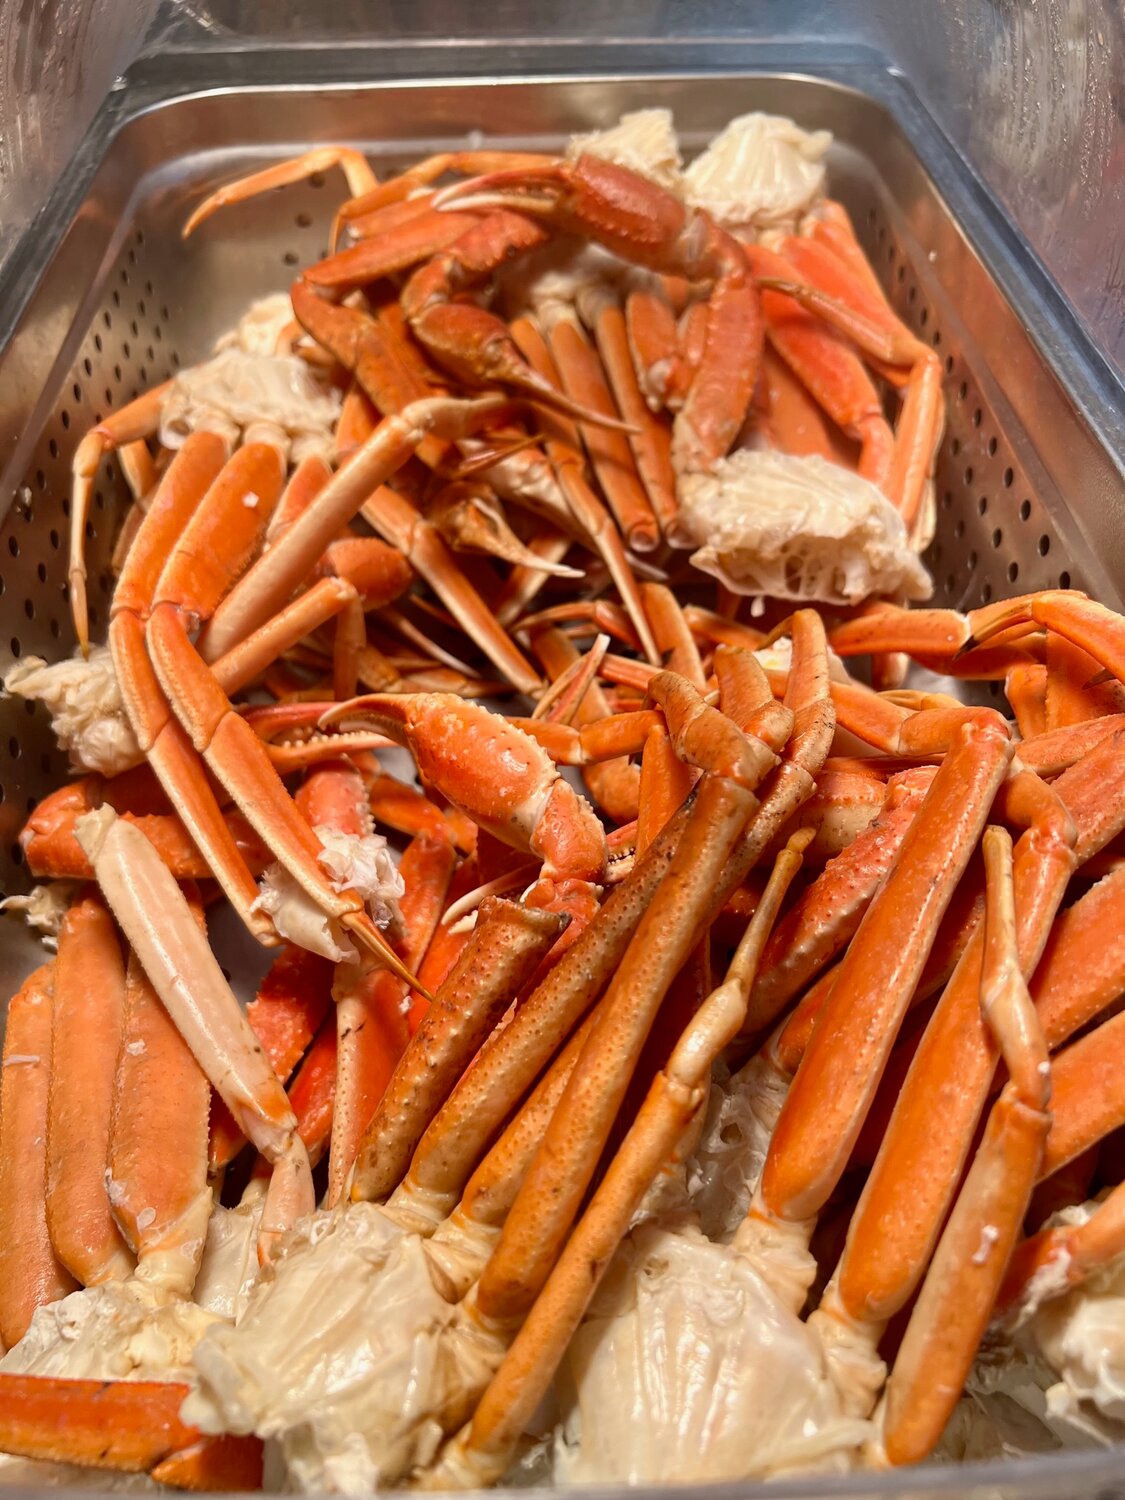 The snow crab legs at 316 Oyster Bar & Seafood Grill are ideal for special gatherings